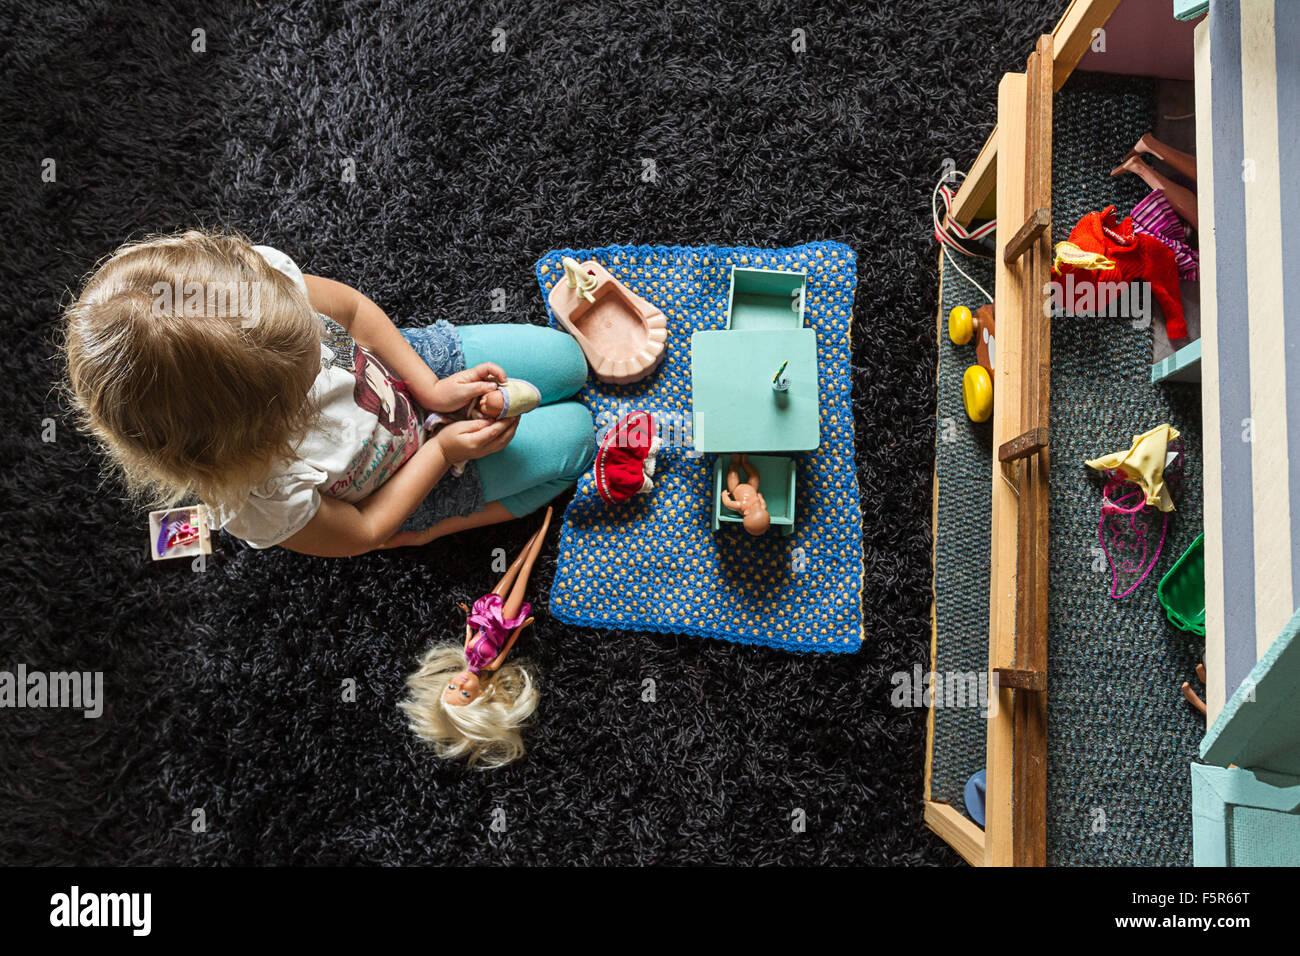 Little girl playing with dolls on a dark carpet inside at home. Stock Photo